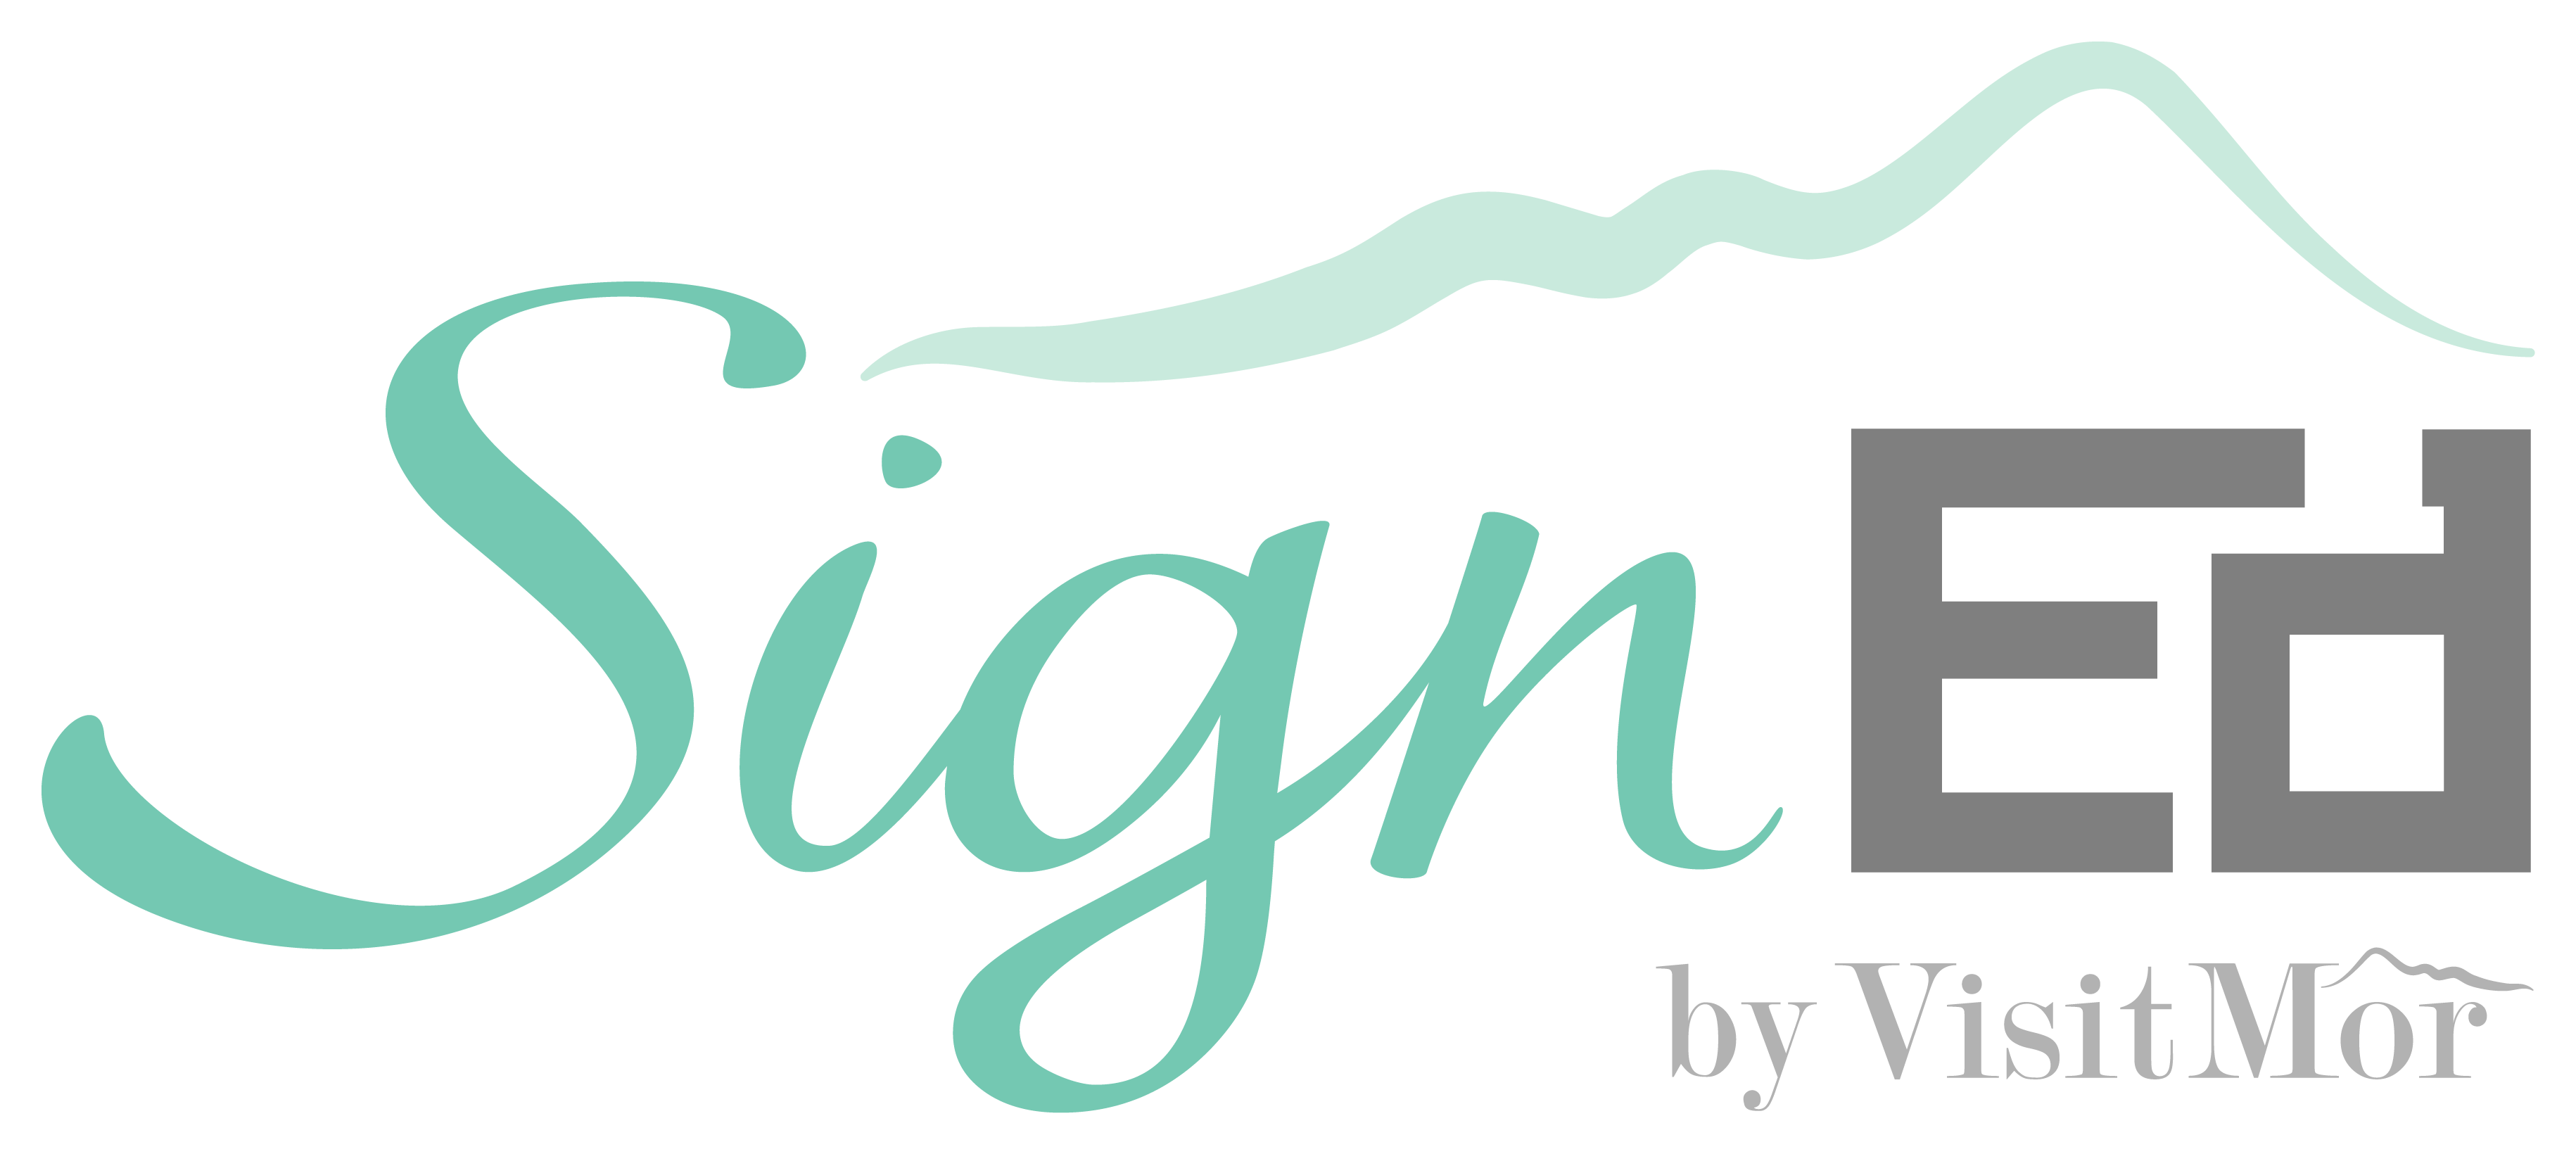 SignEd by VisitMôr logo - green and grey font